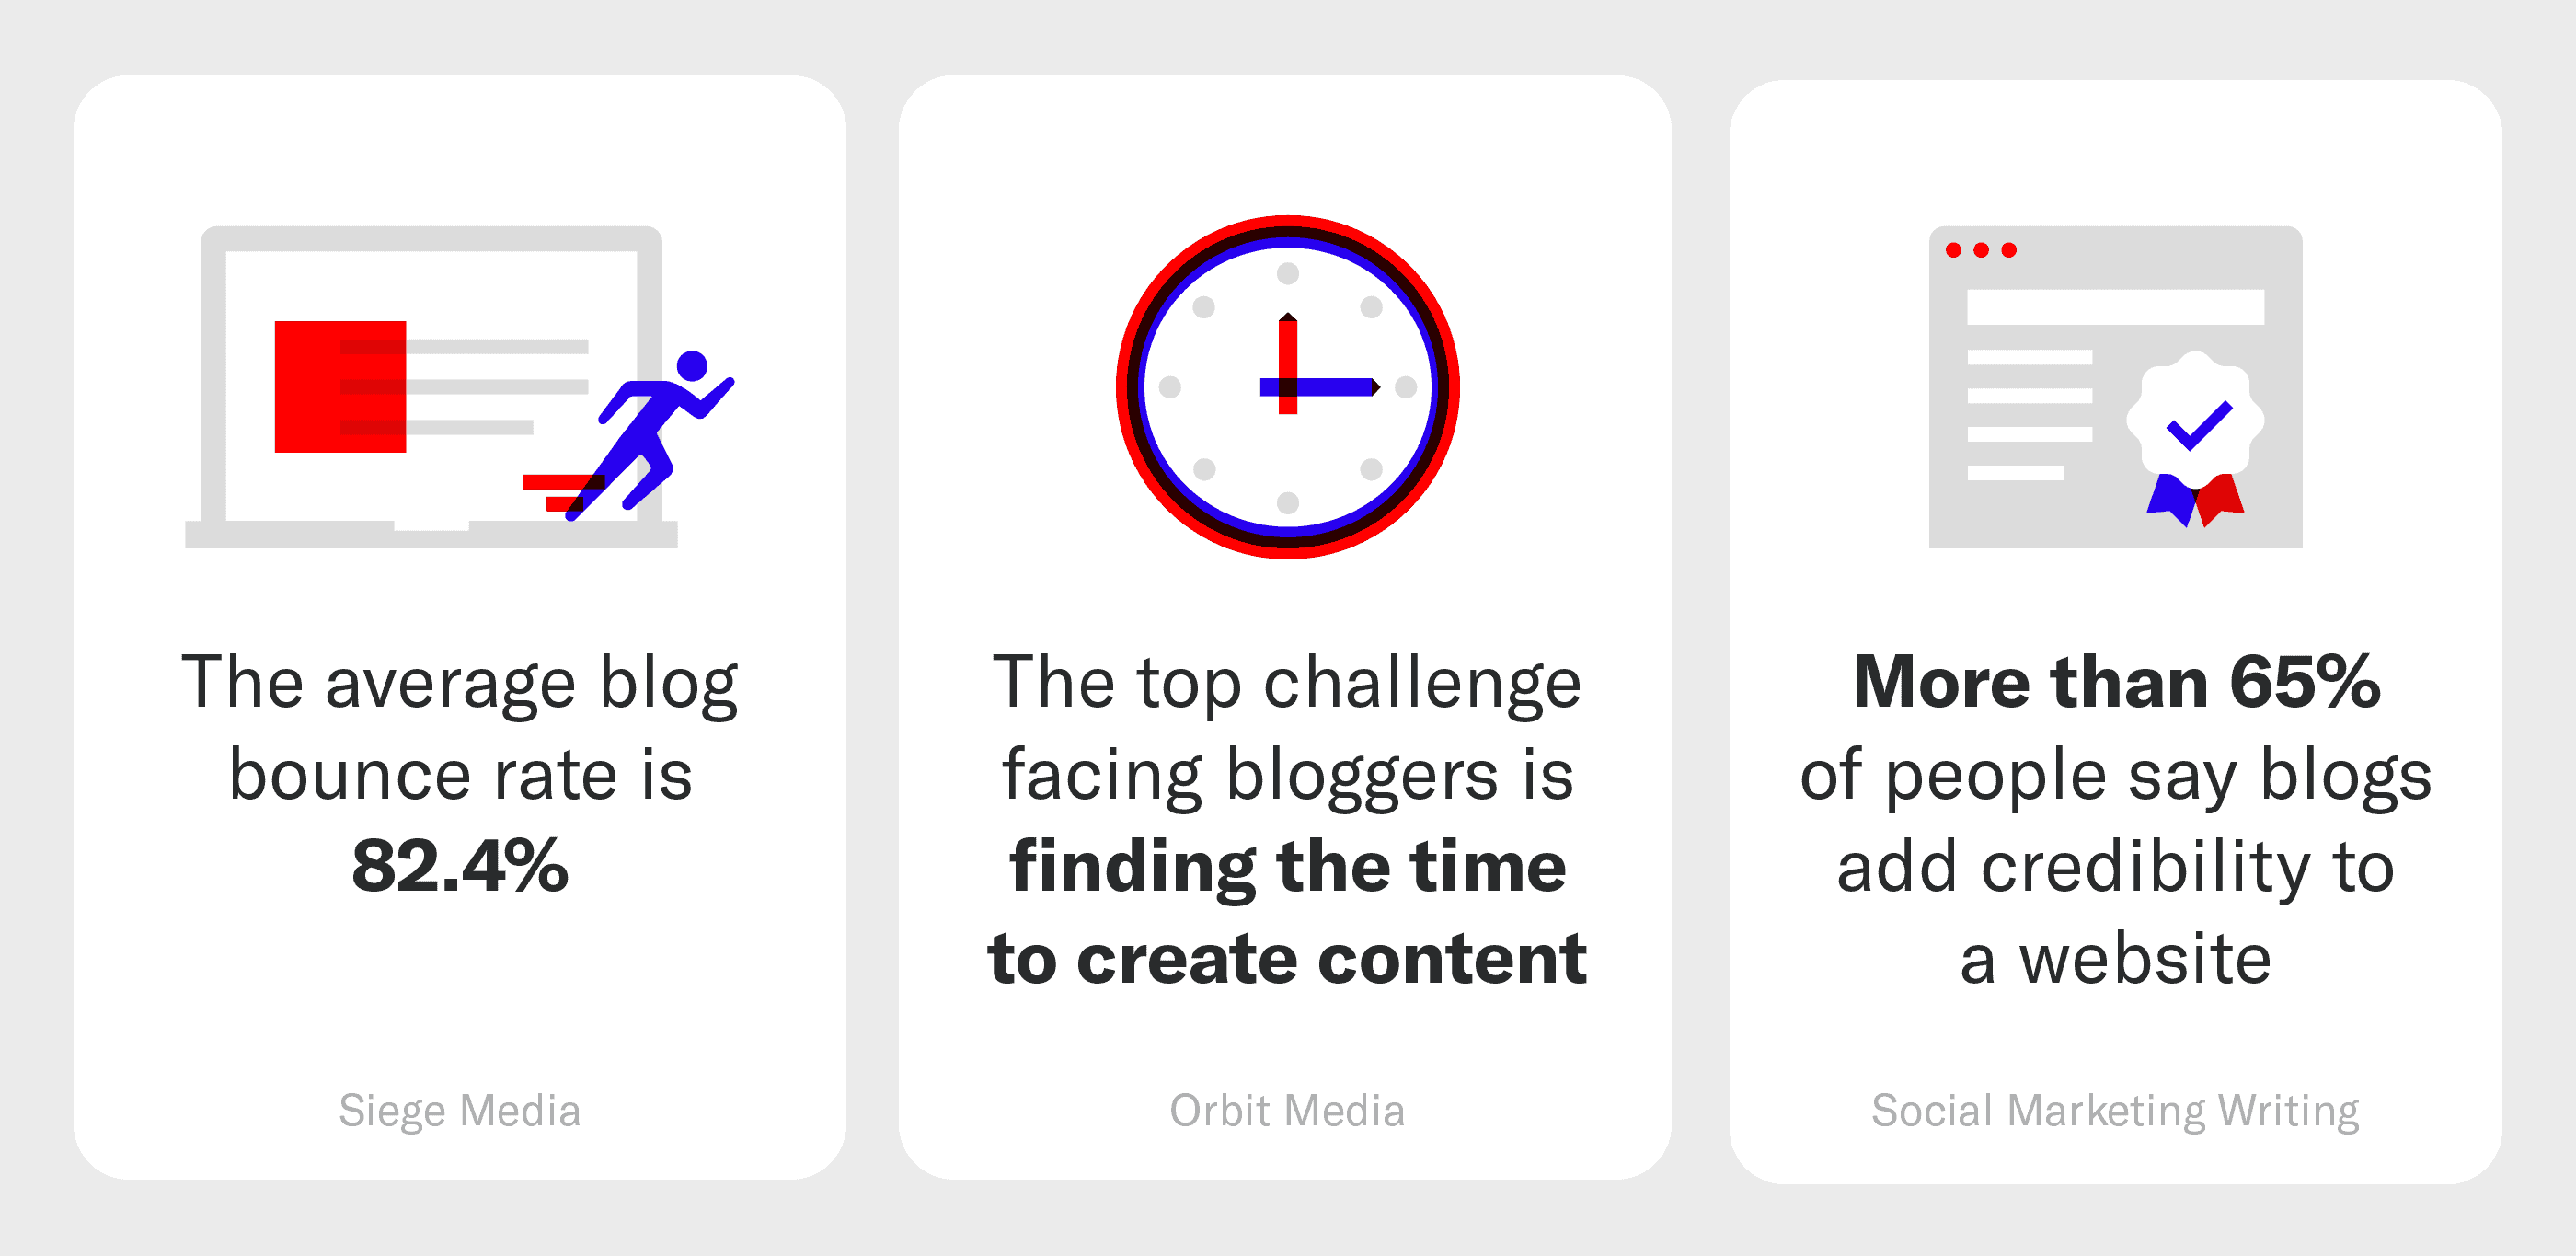 Top blogging statistics highlighted with icons